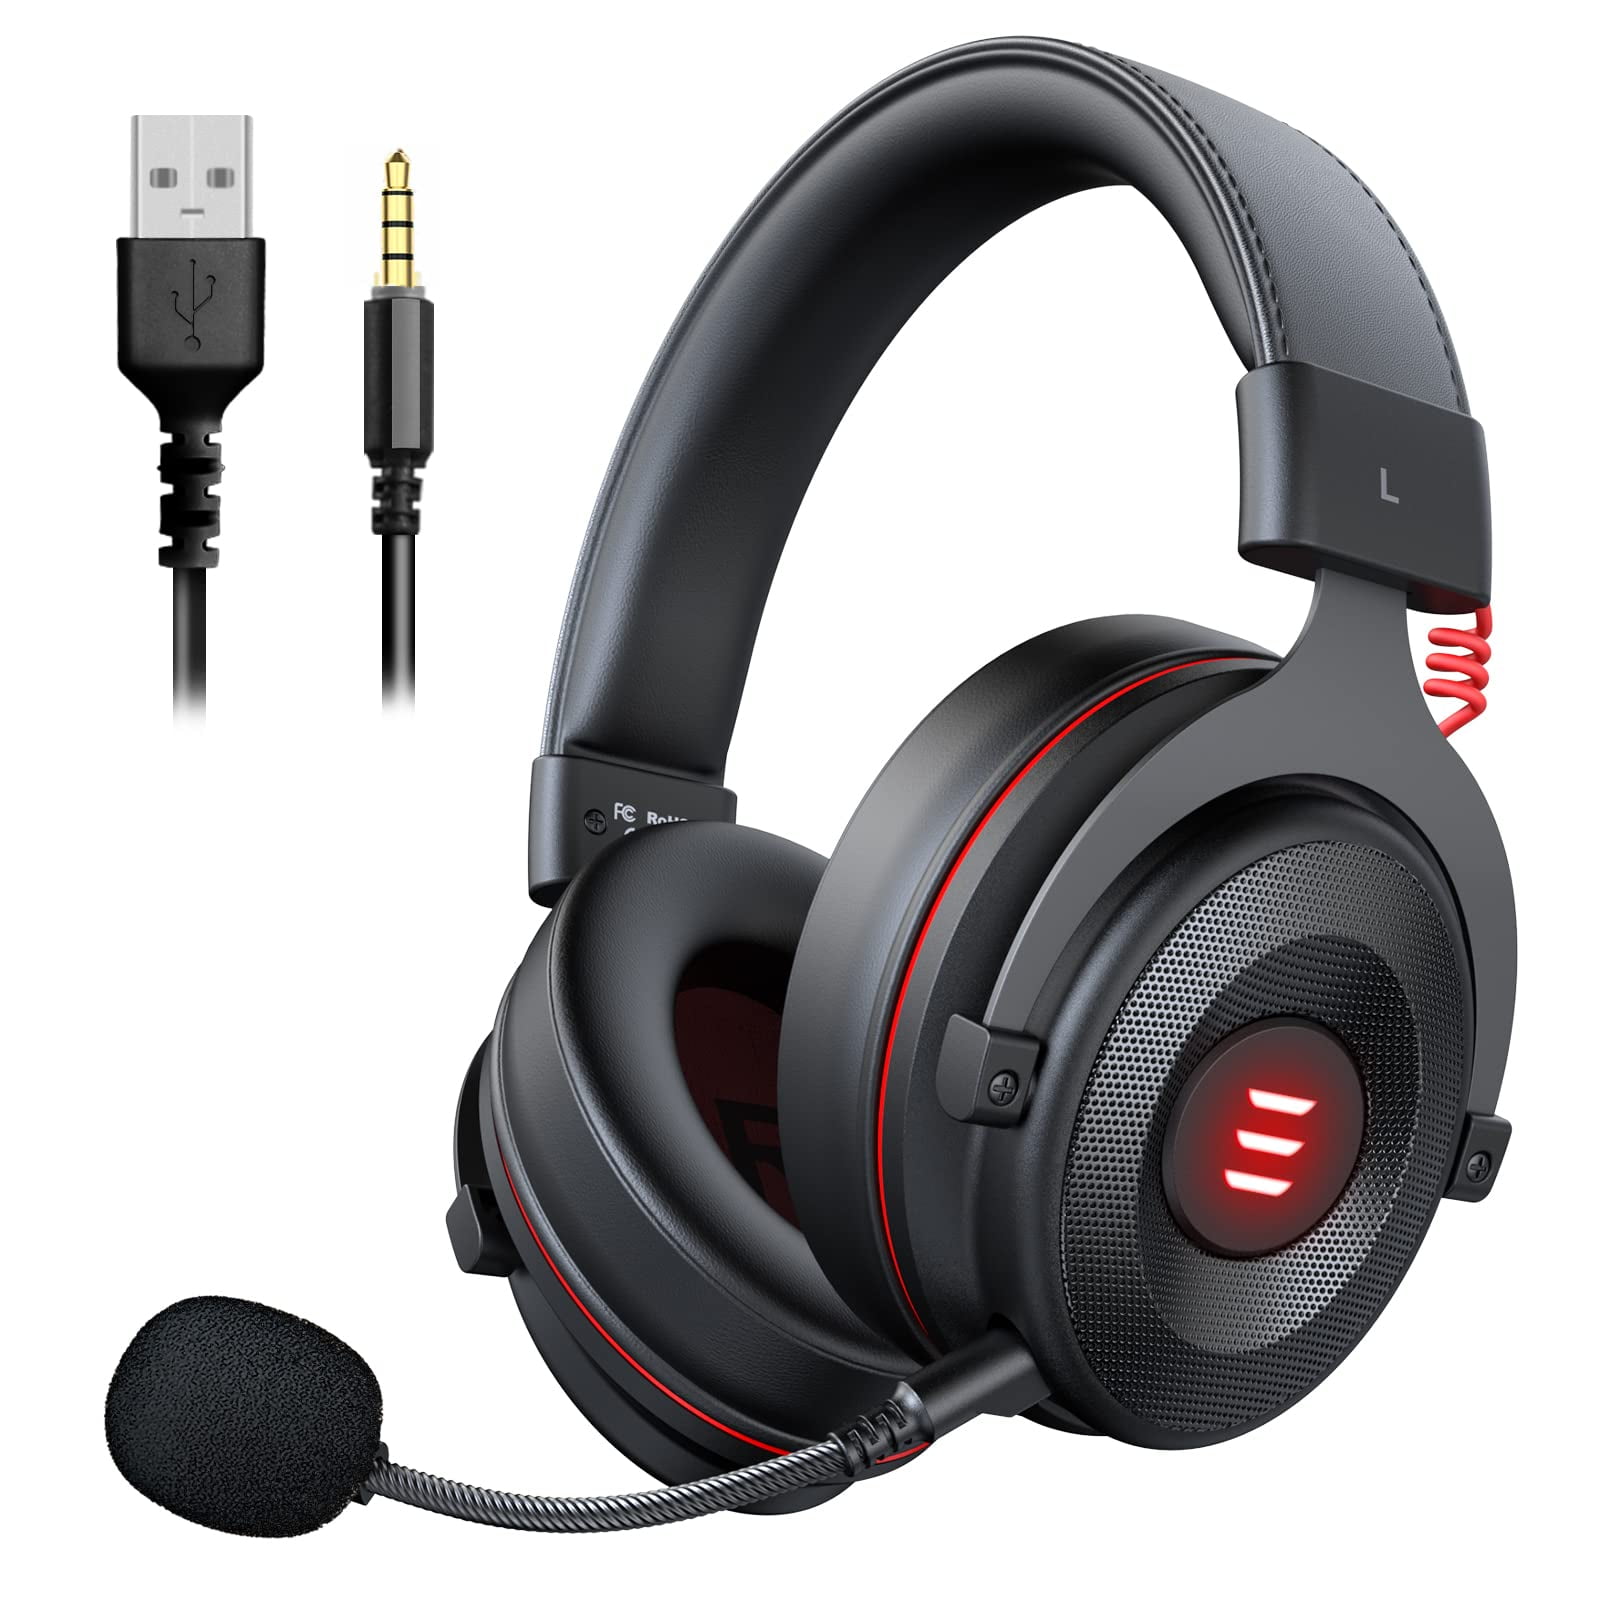 E900 USB Gaming Headset - Computer with Detachable Noise Cancelling Microphone, 7.1 Surround 50MM Driver - Headphones for PC, PS4/PS5, Xbox One, Switch, Computer, Laptop -